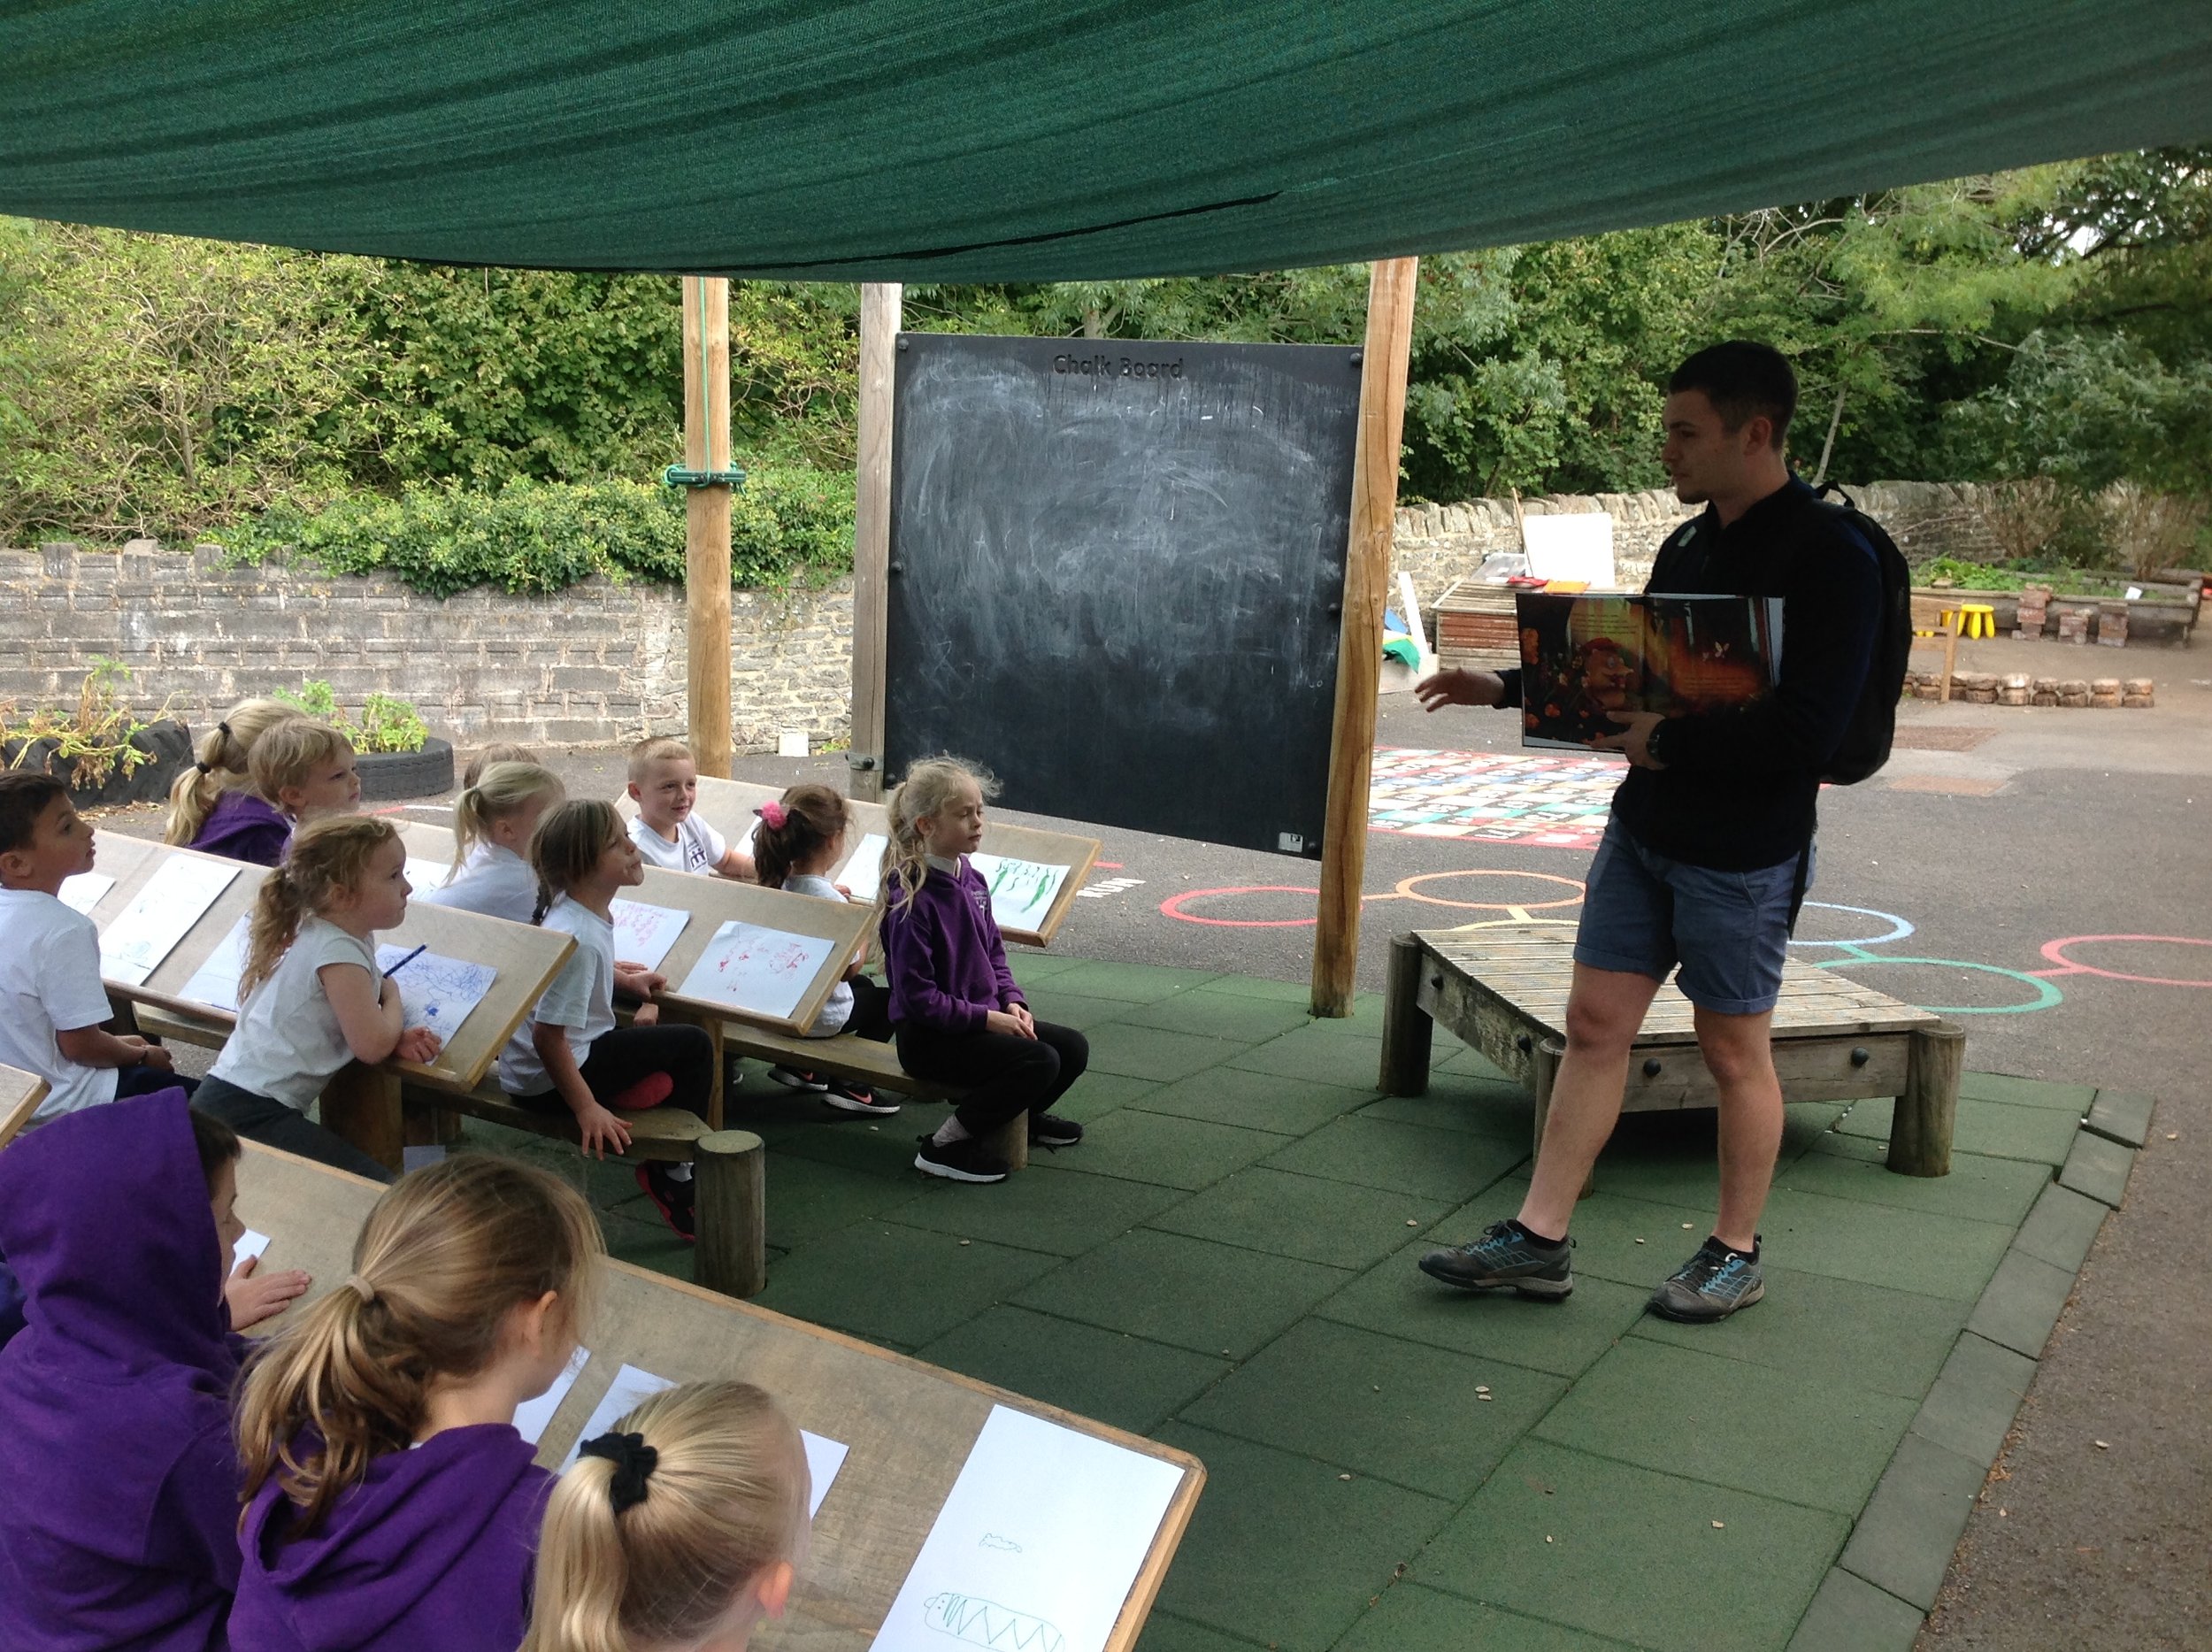 Pic 19 - School visit, outdoors, storytelling, pupils, benches.JPG